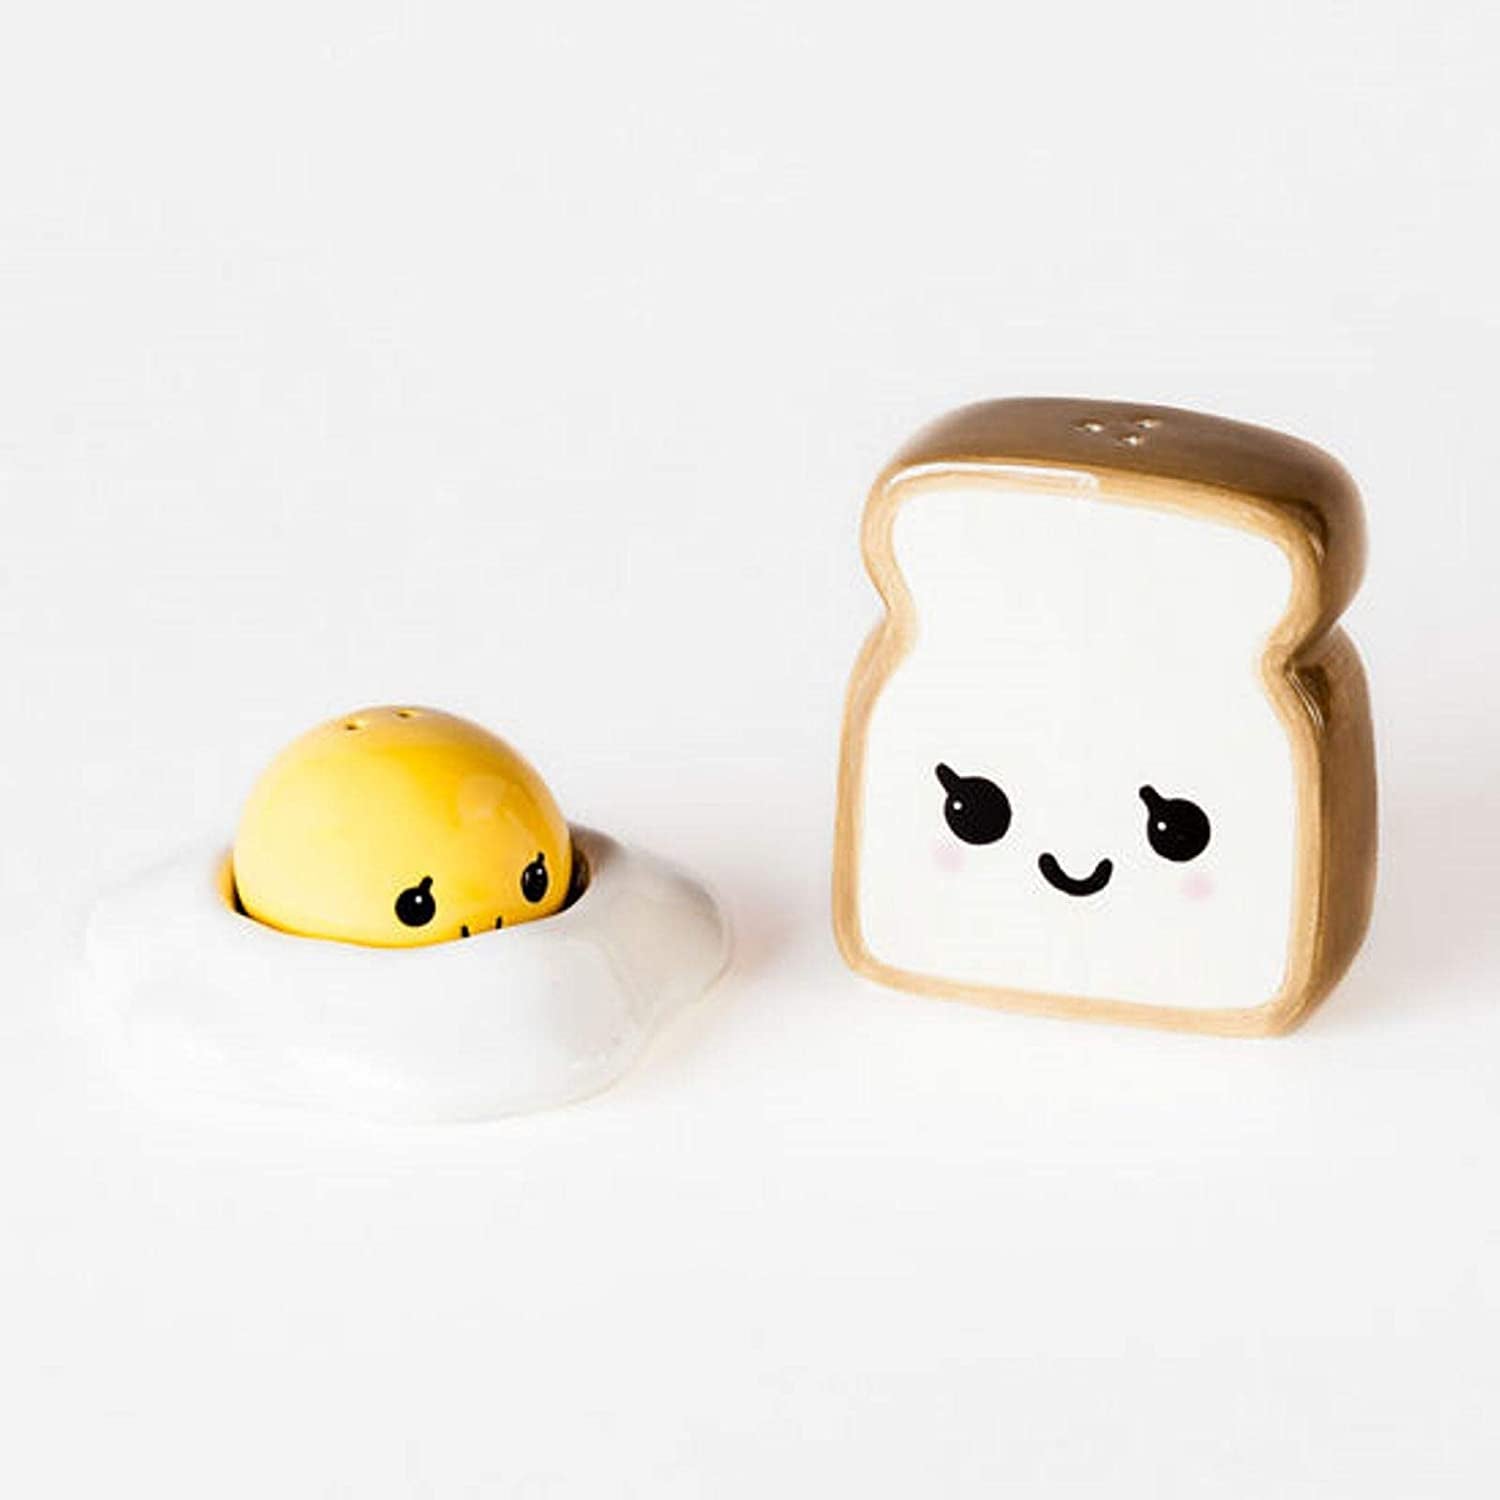 salt and pepper shakers shaped like a sunny side up egg and toast with cute happy faces